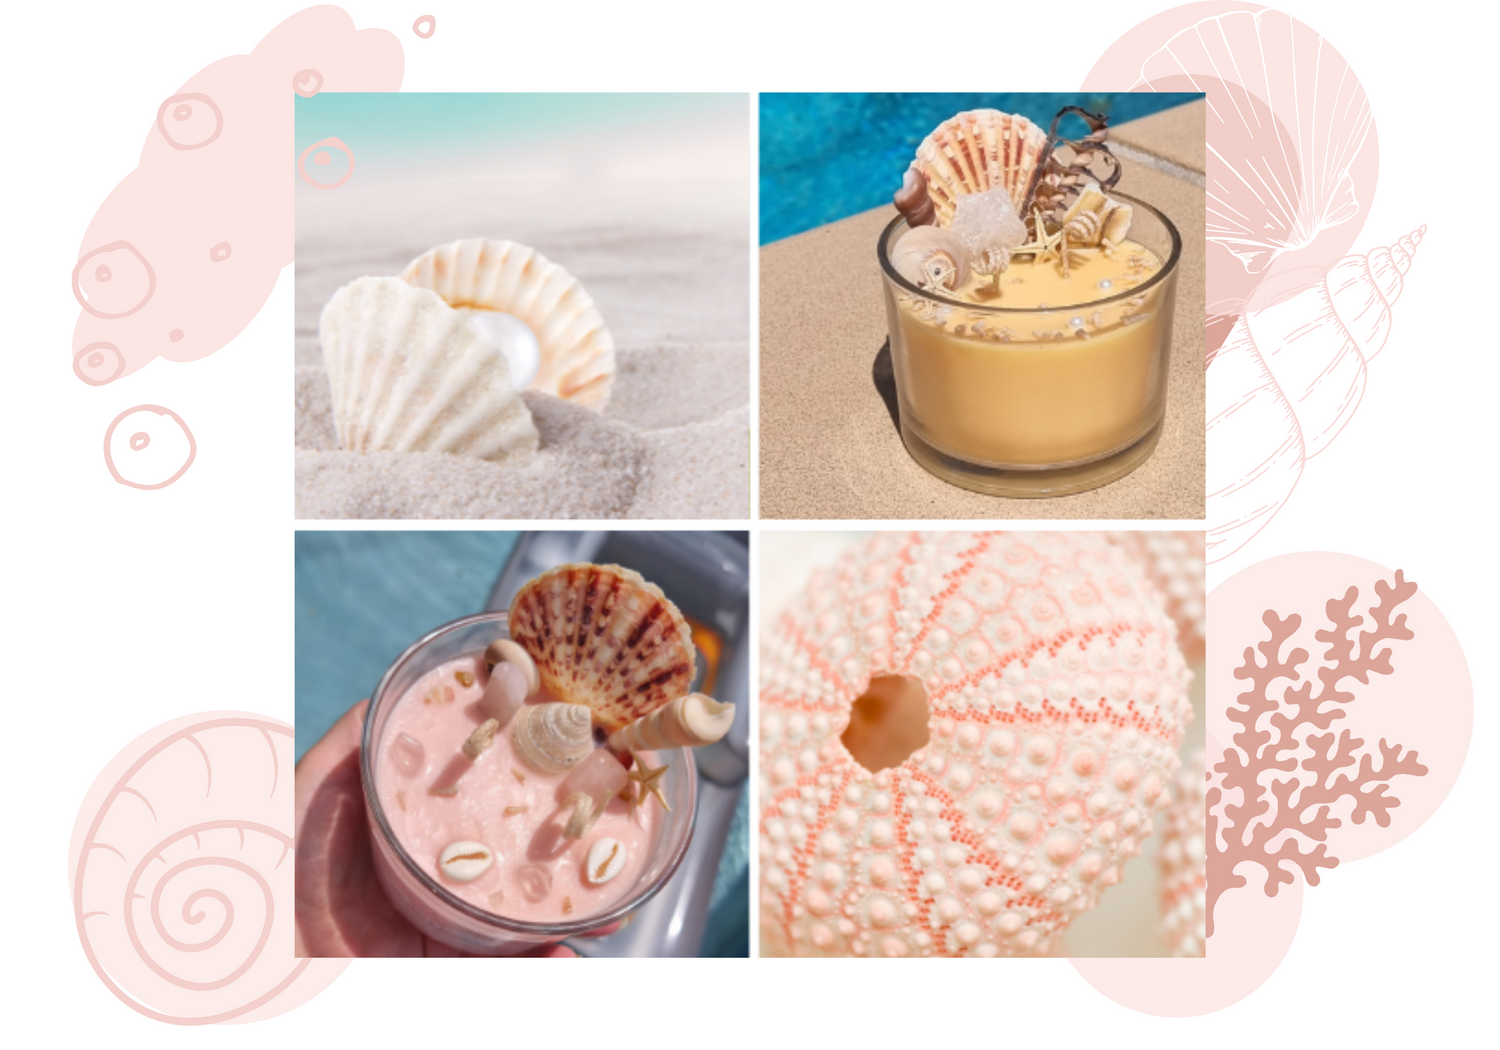 A selection of fragrance and shell infused candles available at Nrglife.